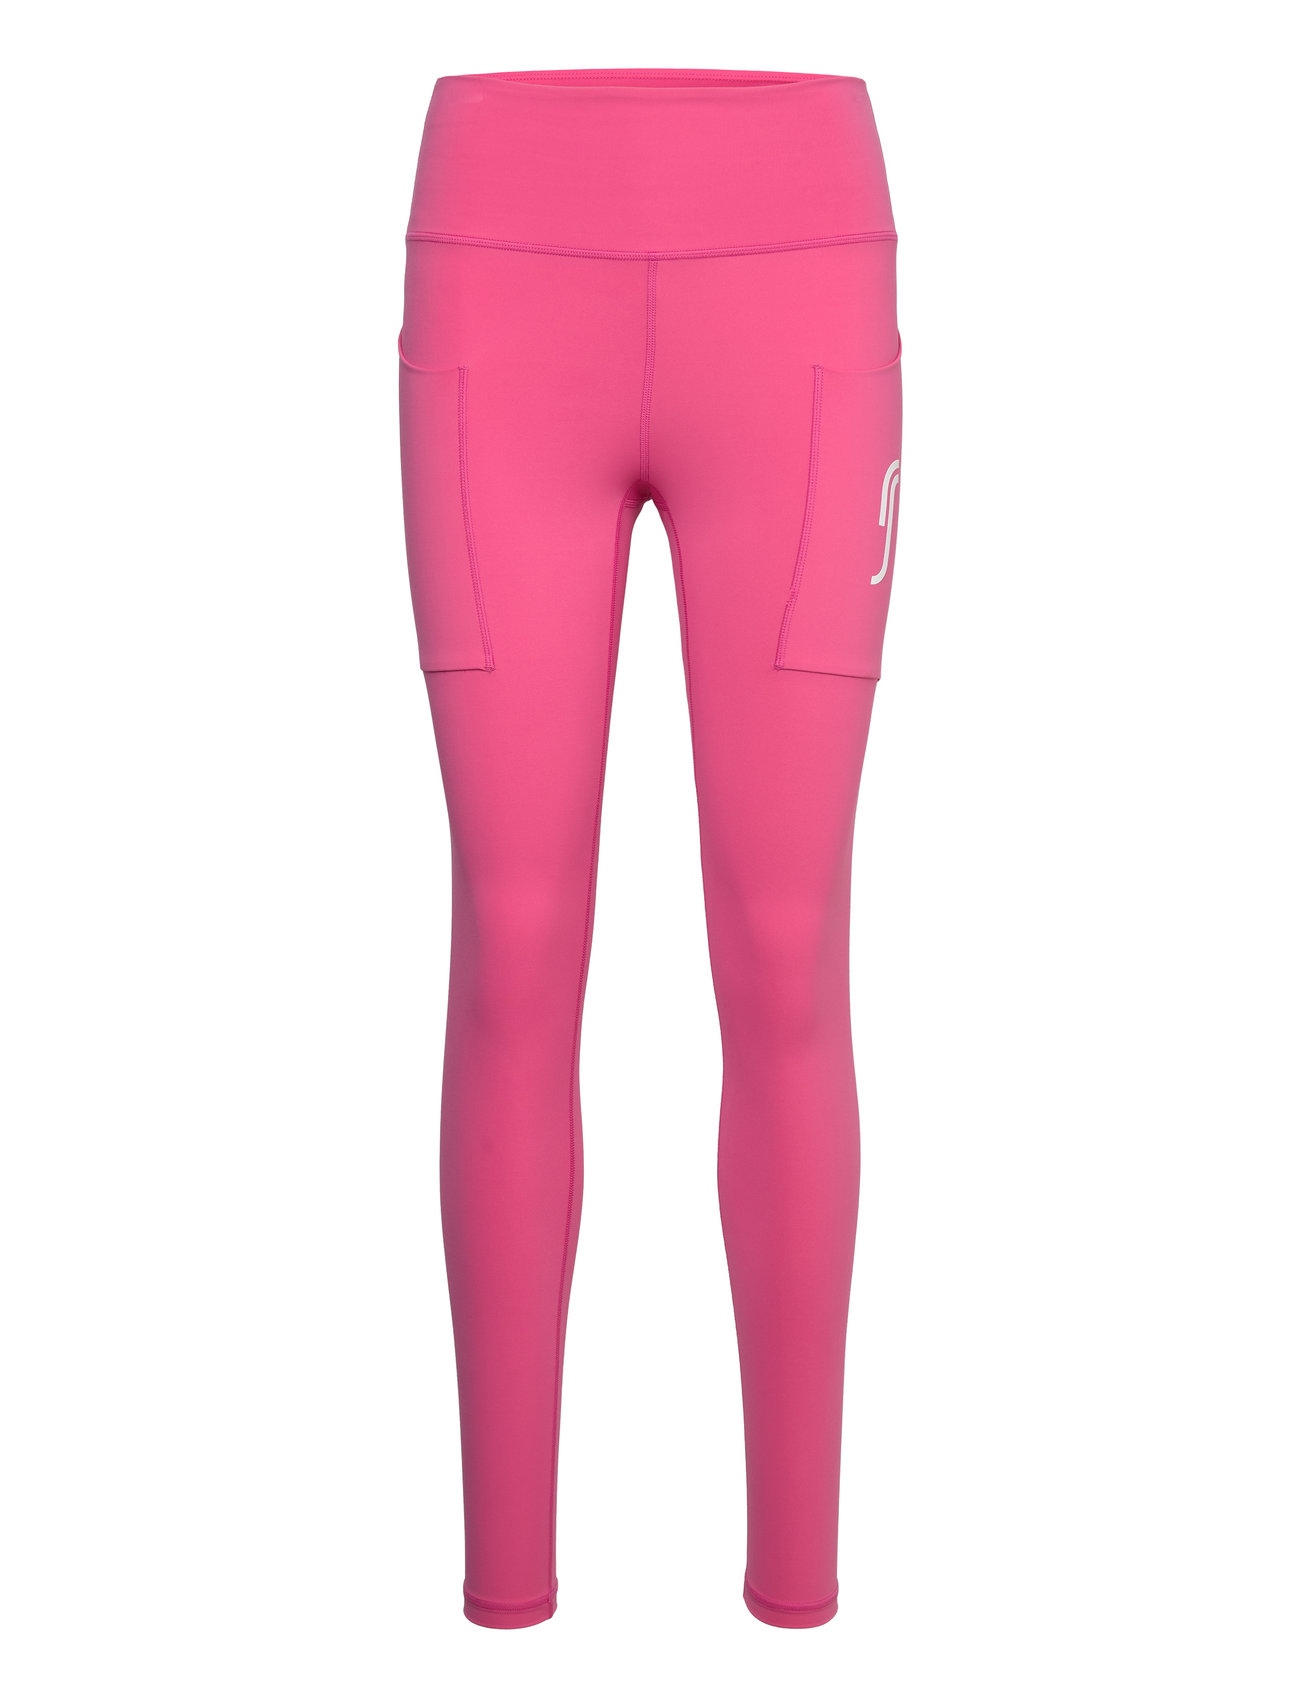 Women’s Side Pocket Tights Sport Running-training Tights Pink RS Sports